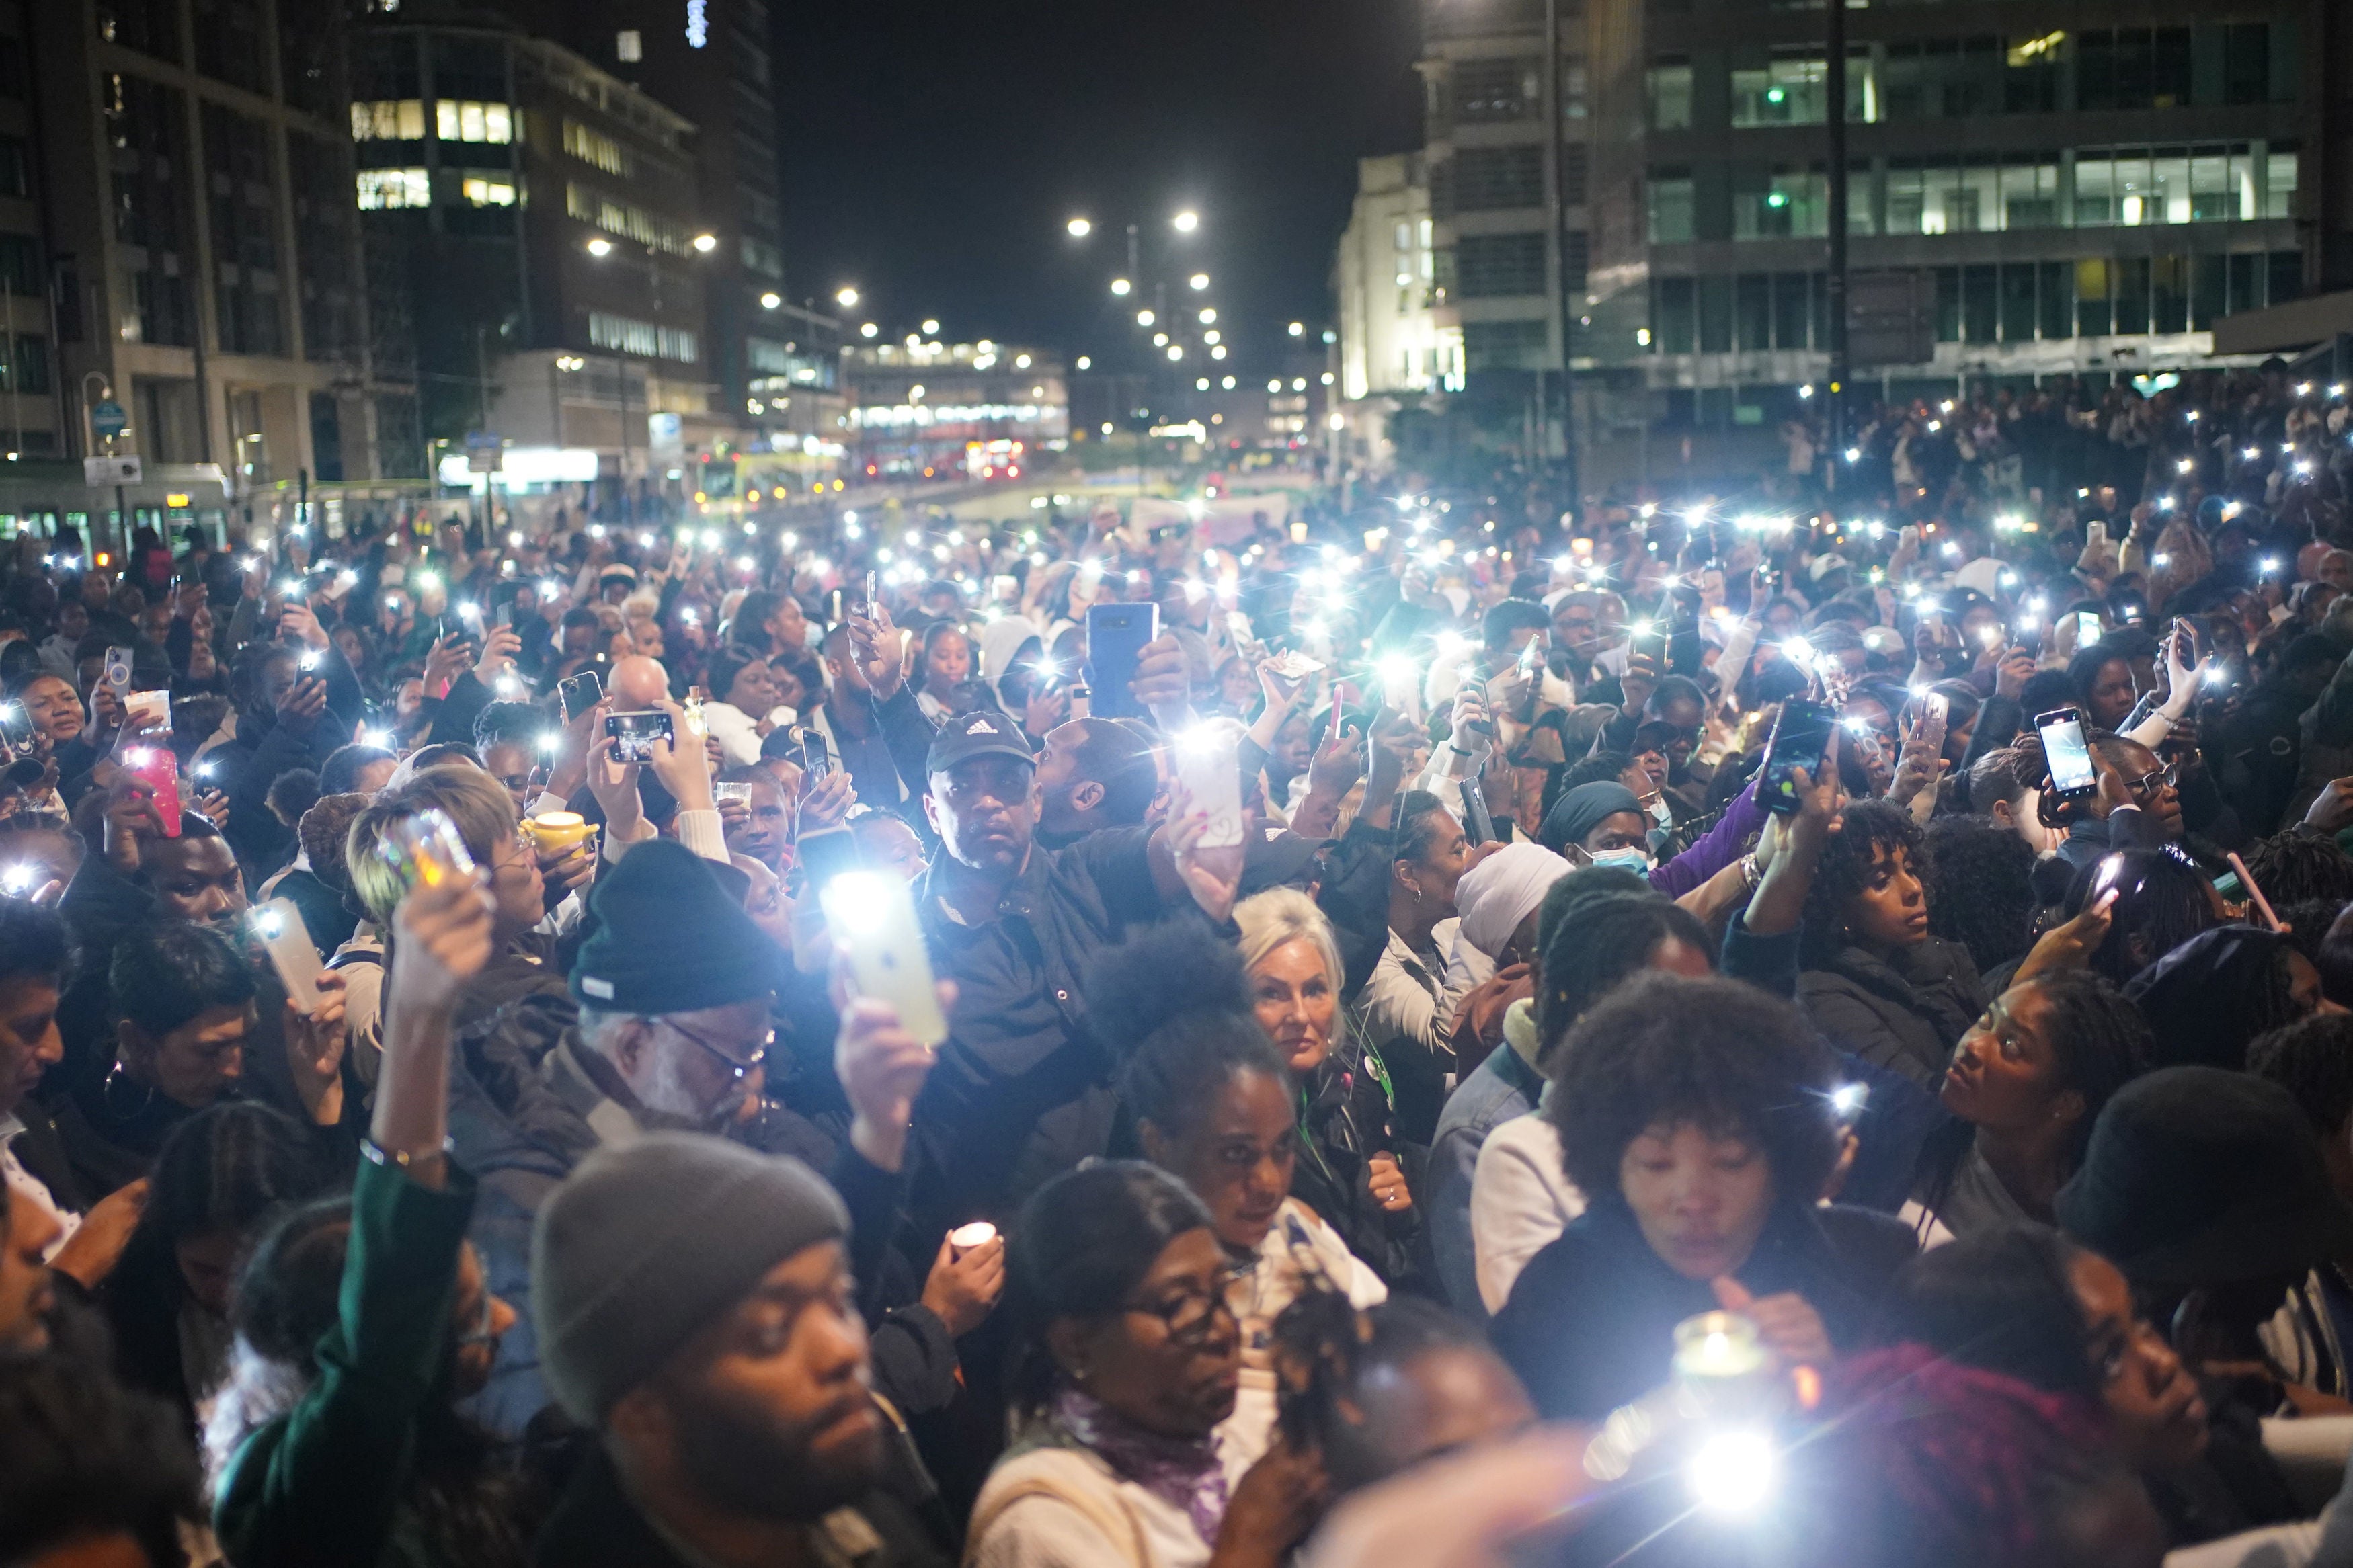 Thousands are reported to have attended the vigil in Croydon